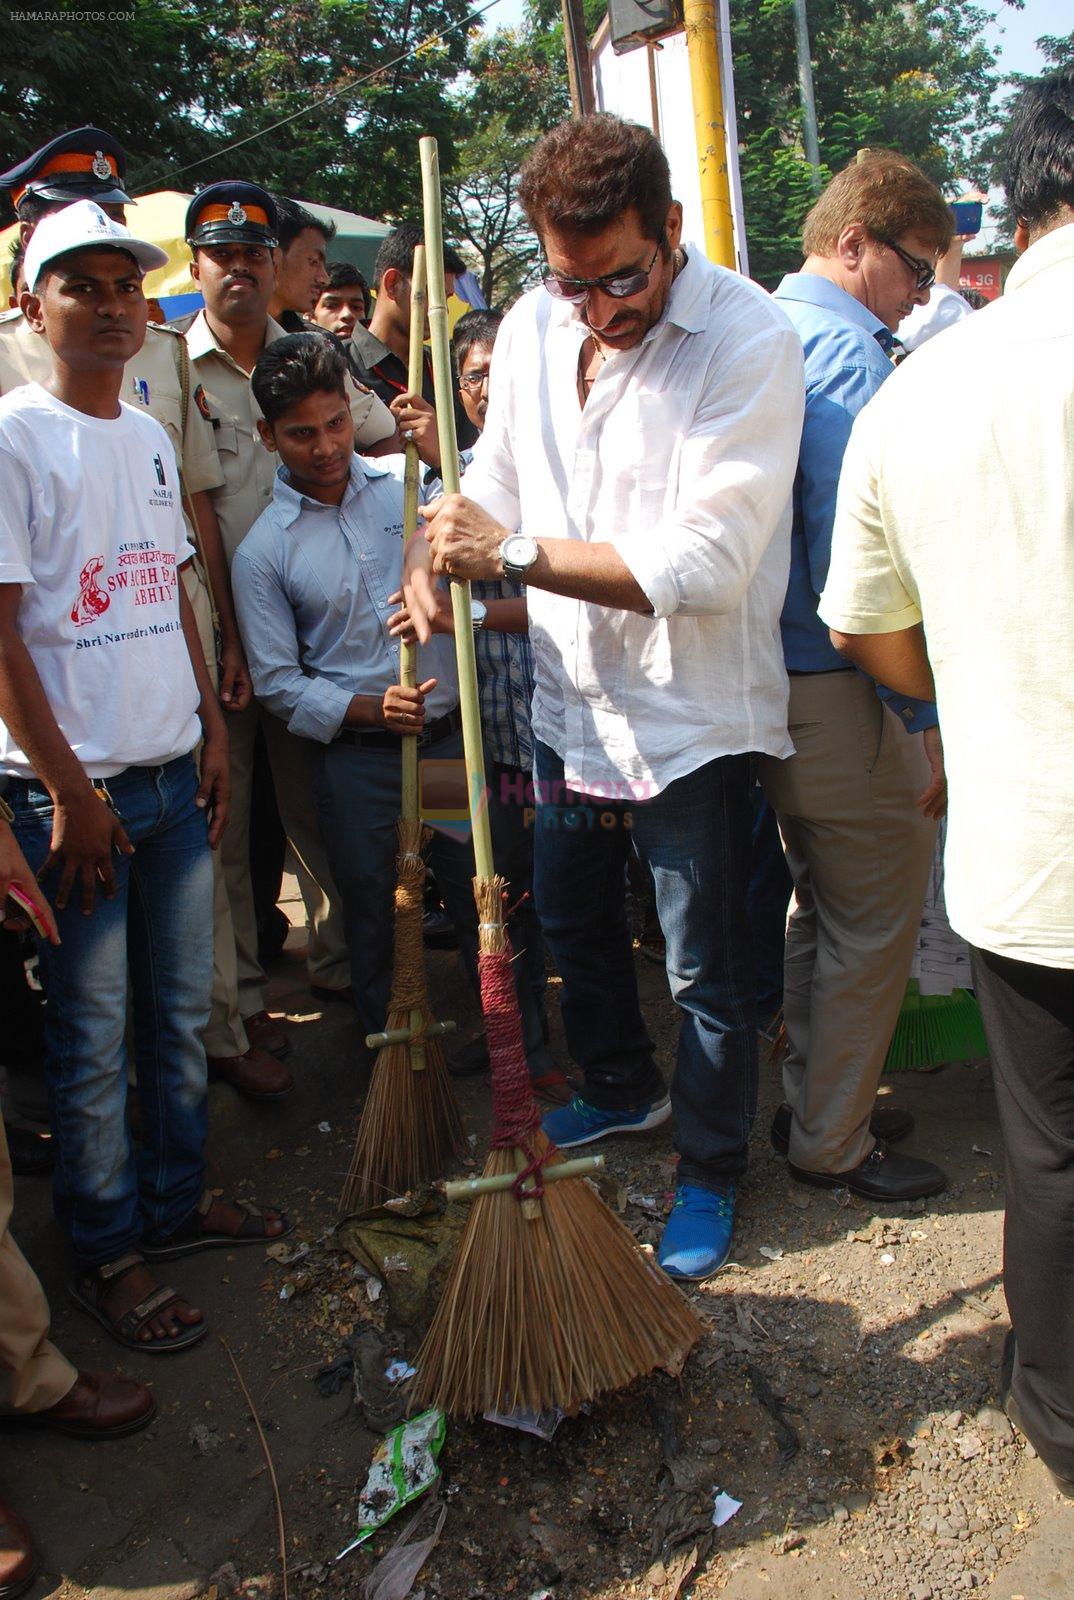 Mukesh Rishi at cleanliness drive by Nahar Group in Powai on 2nd Nov 2014